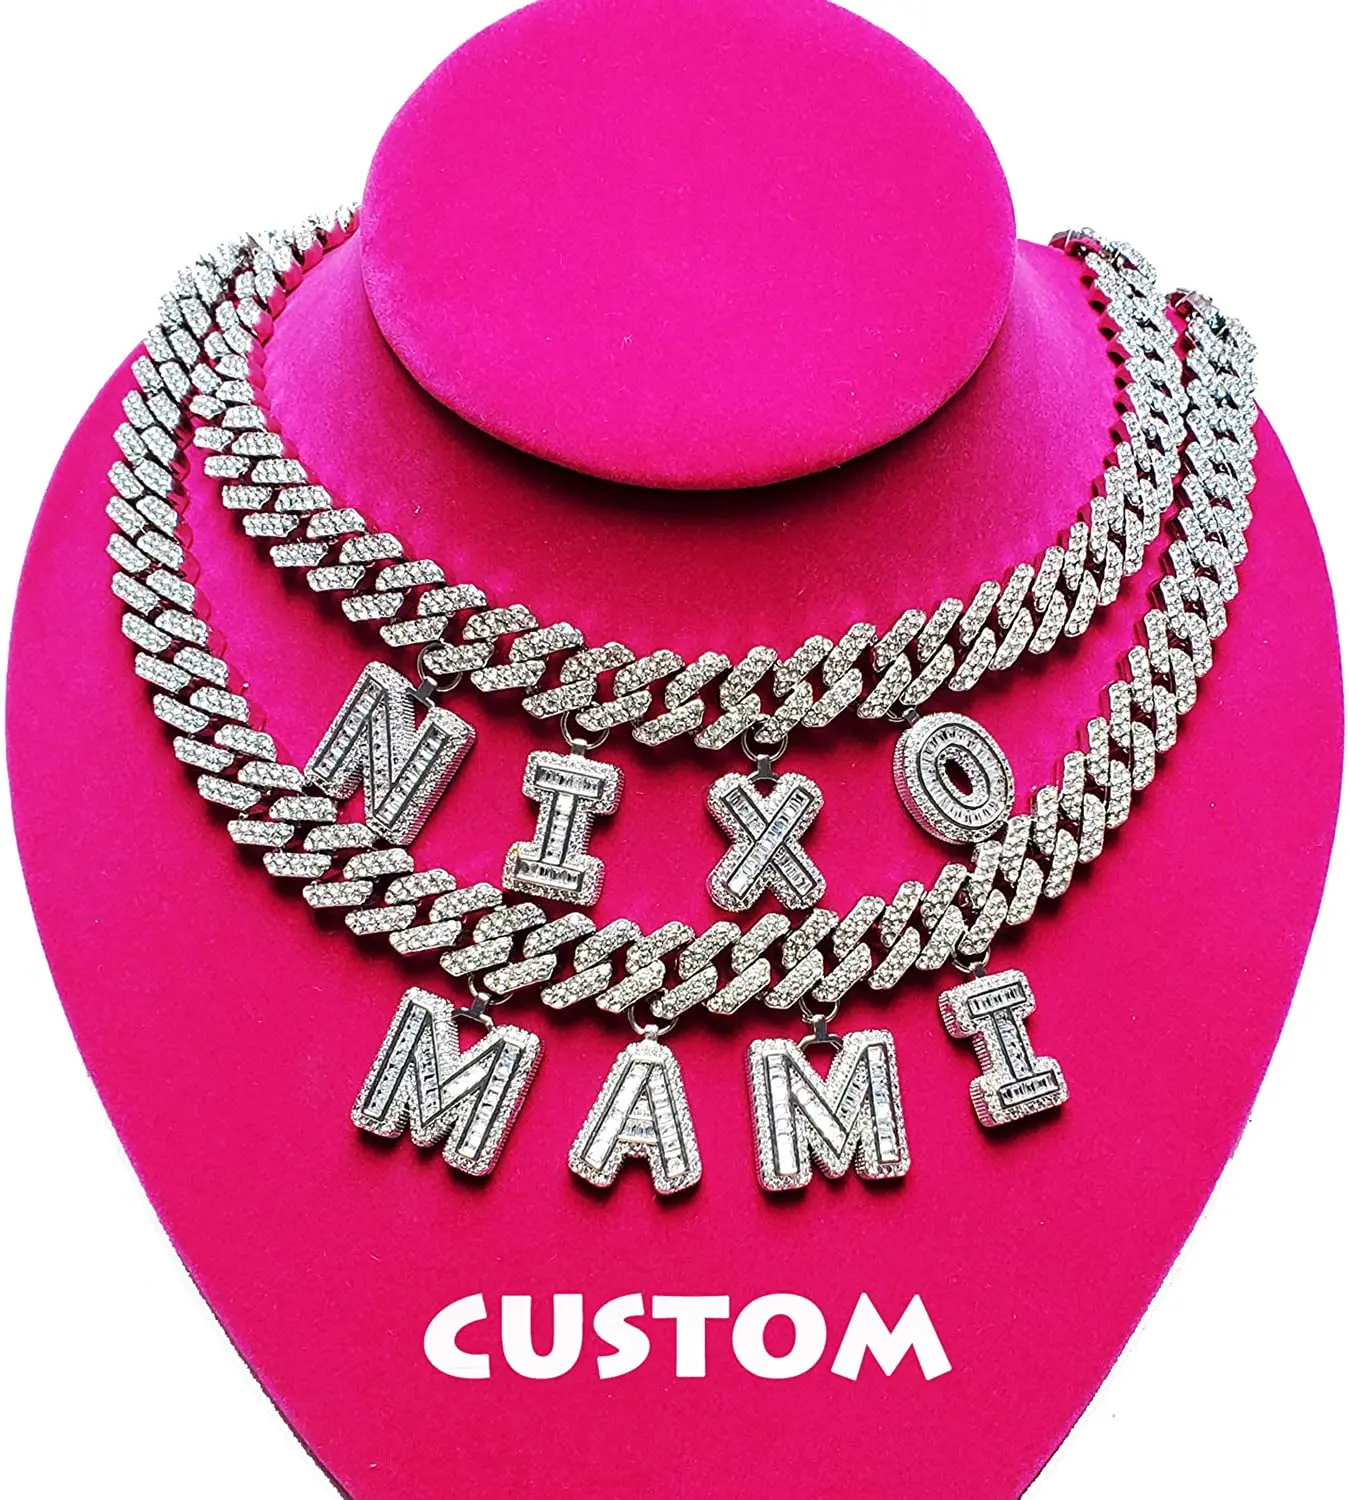 

Custom Personalize Iced Out Diy Bling Initial Letter Baguette Name Charm Cuban Link Choker Rapper Chain Necklace